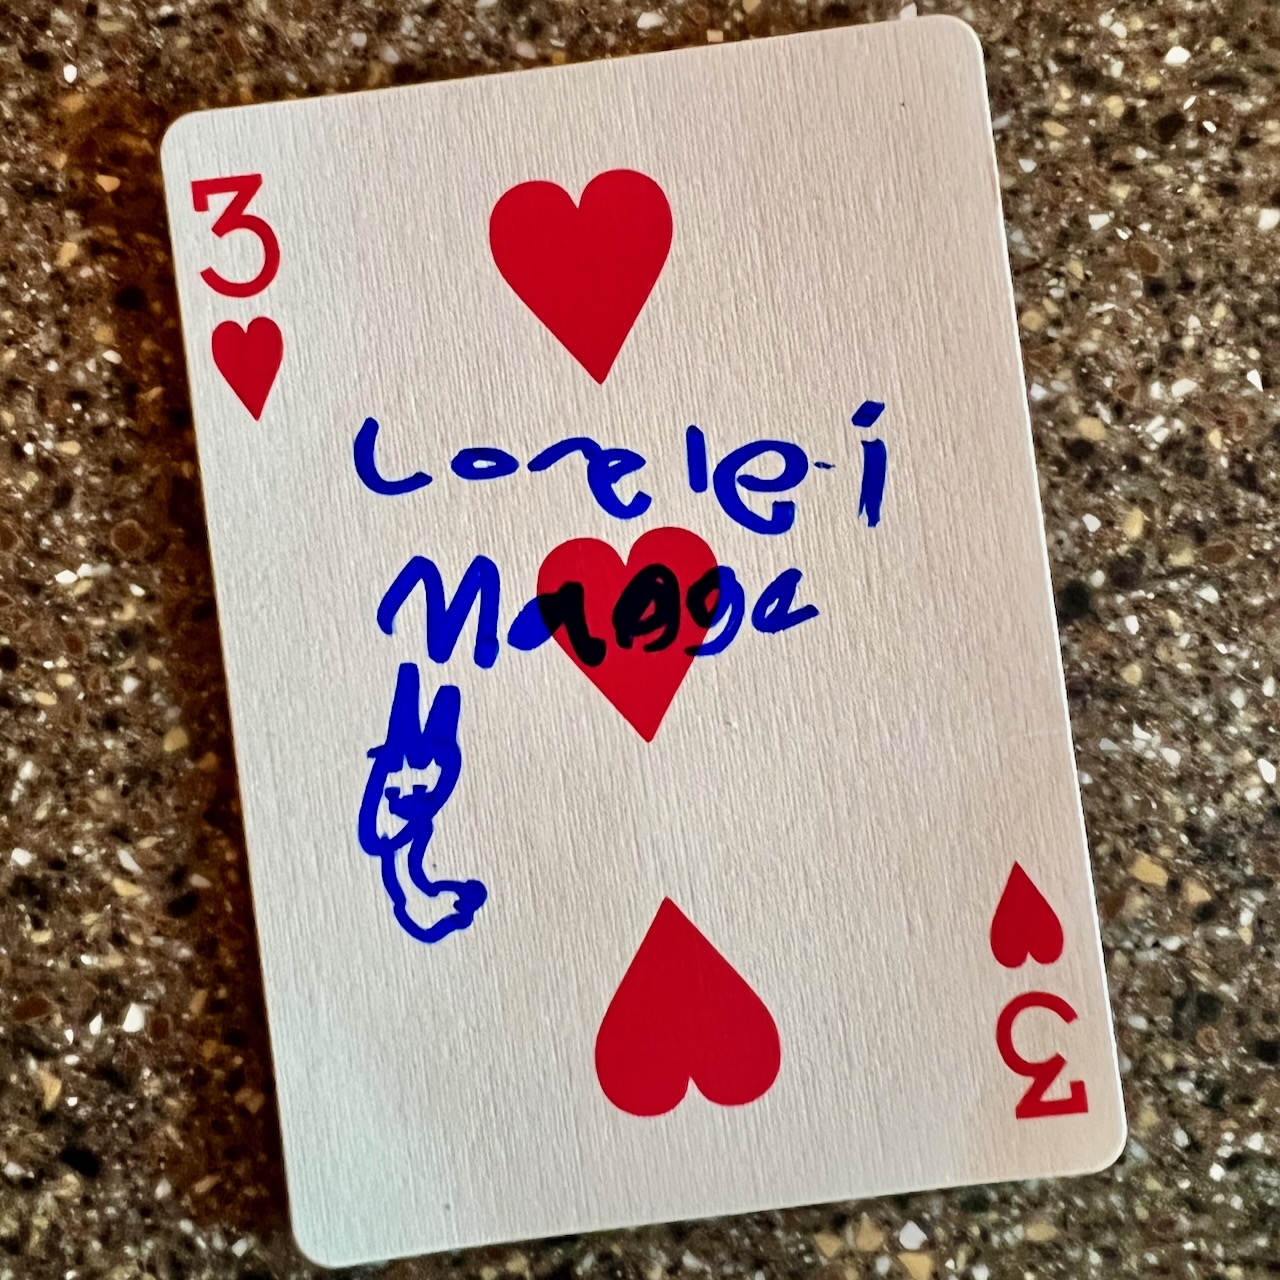 The card Lorelei pulled at the magic show